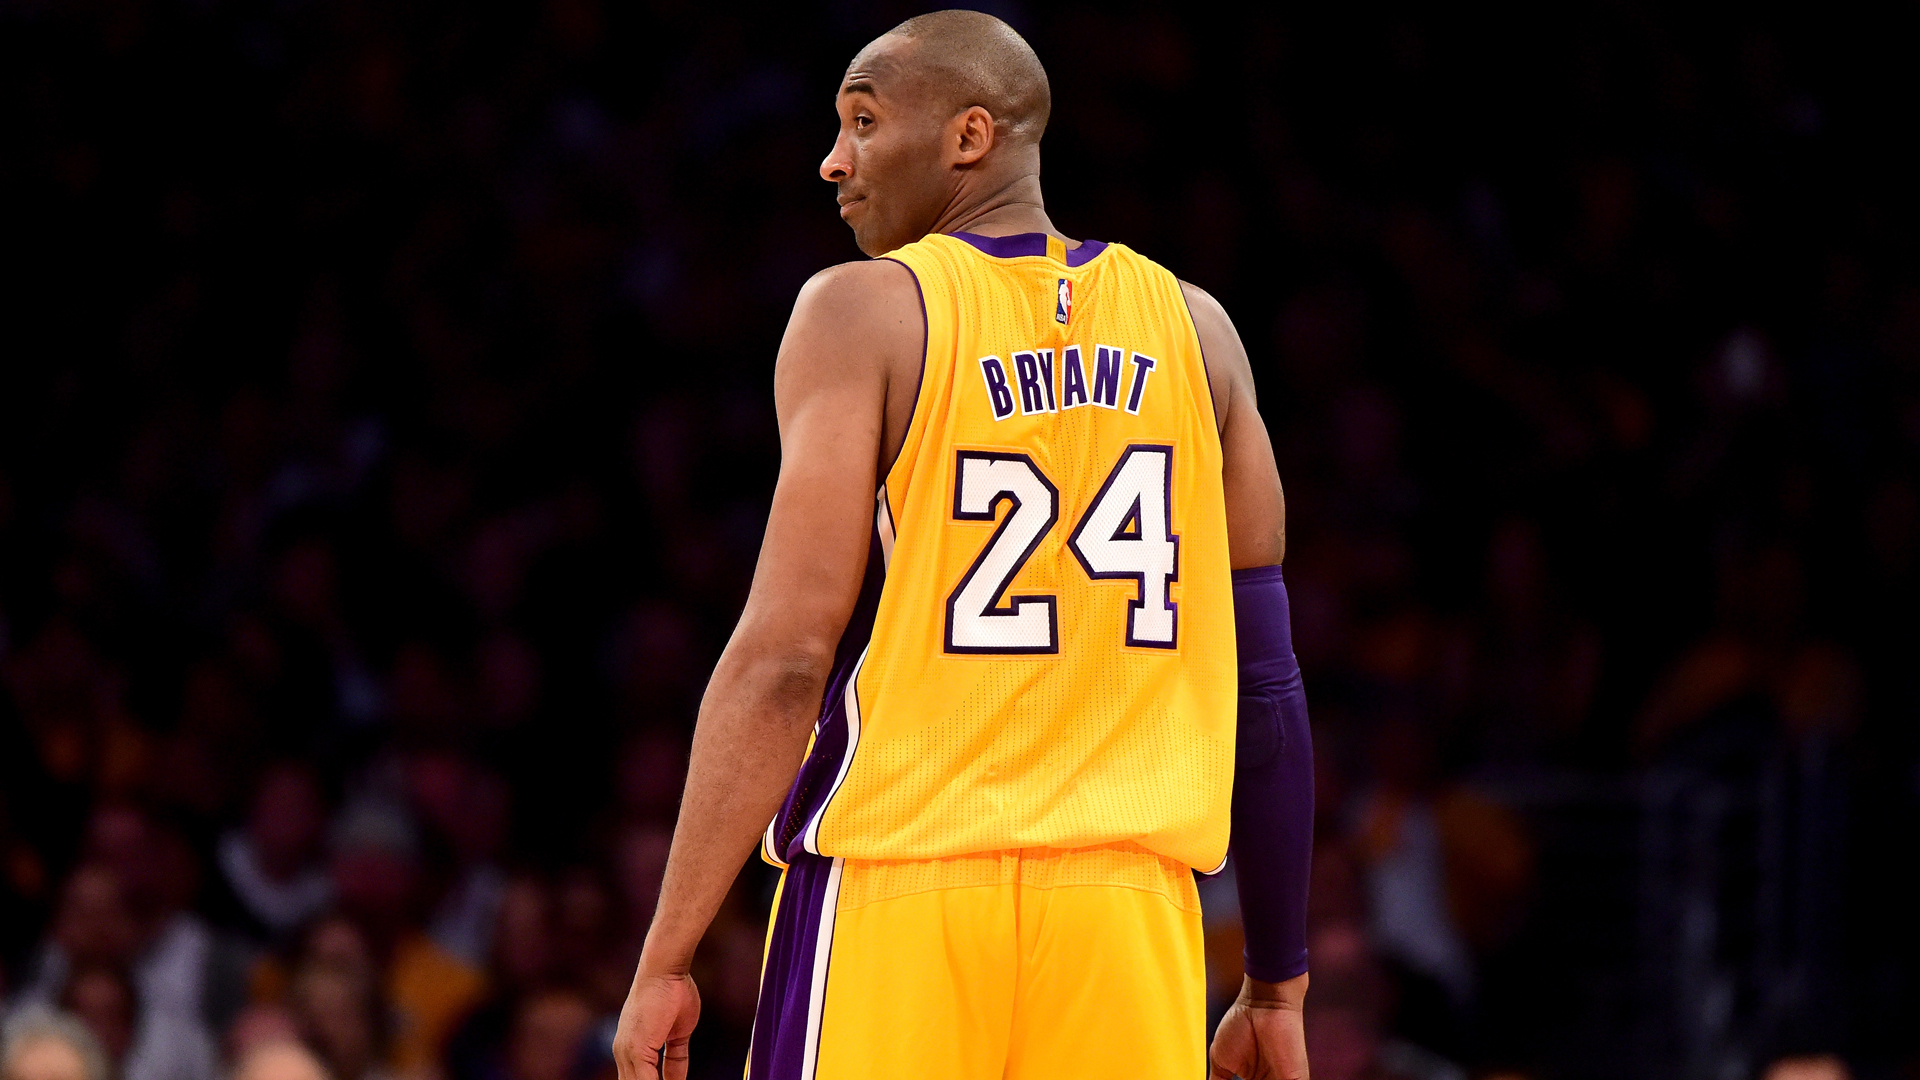 Kobe Bryant Wallpaper Image Photos Pictures Background